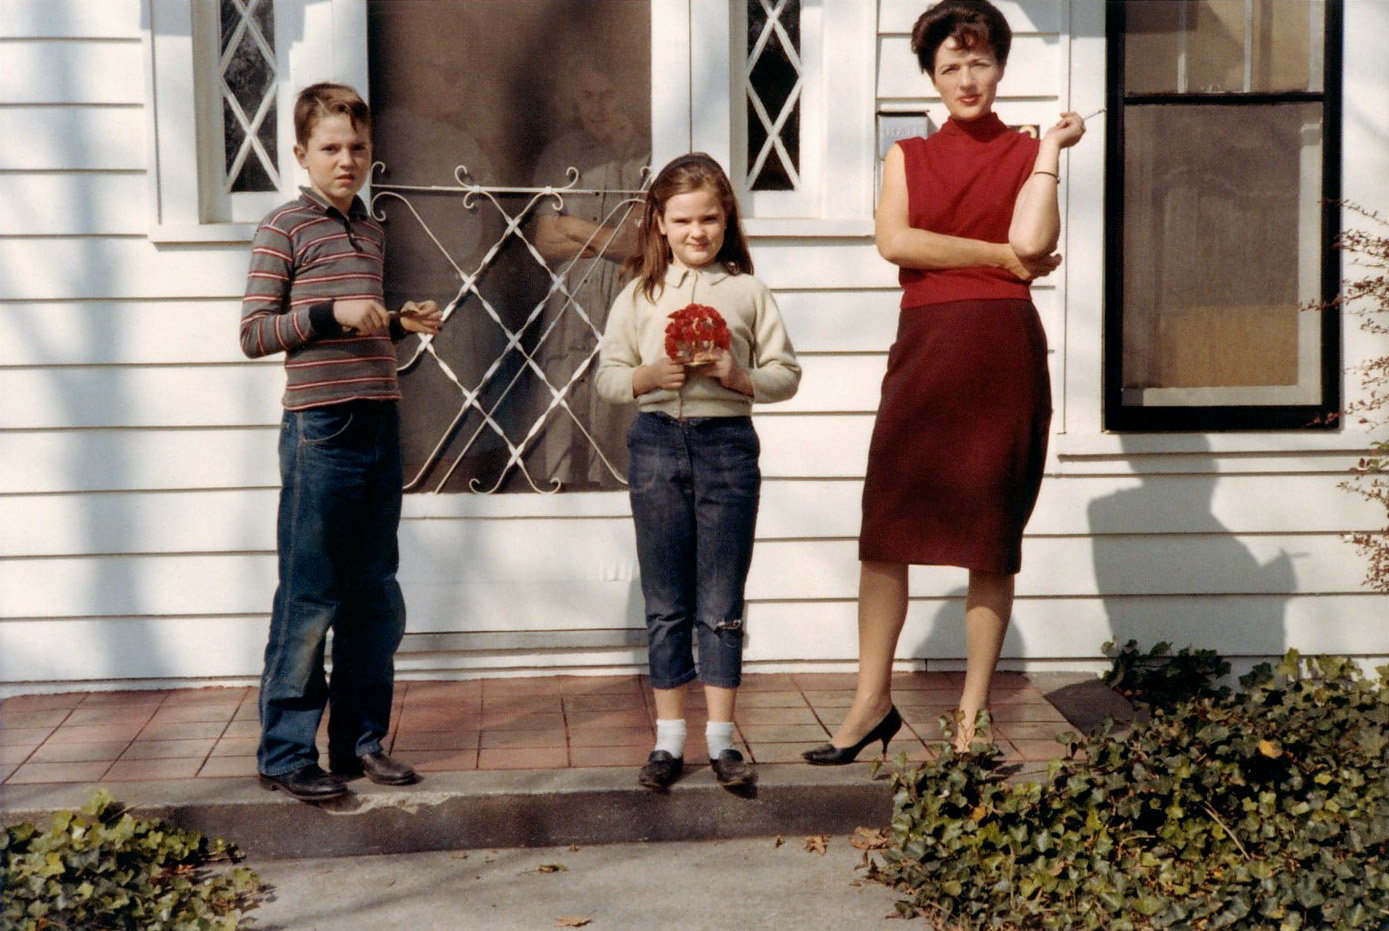 Sheets Family Nashville Tennessee 1964. View full size.